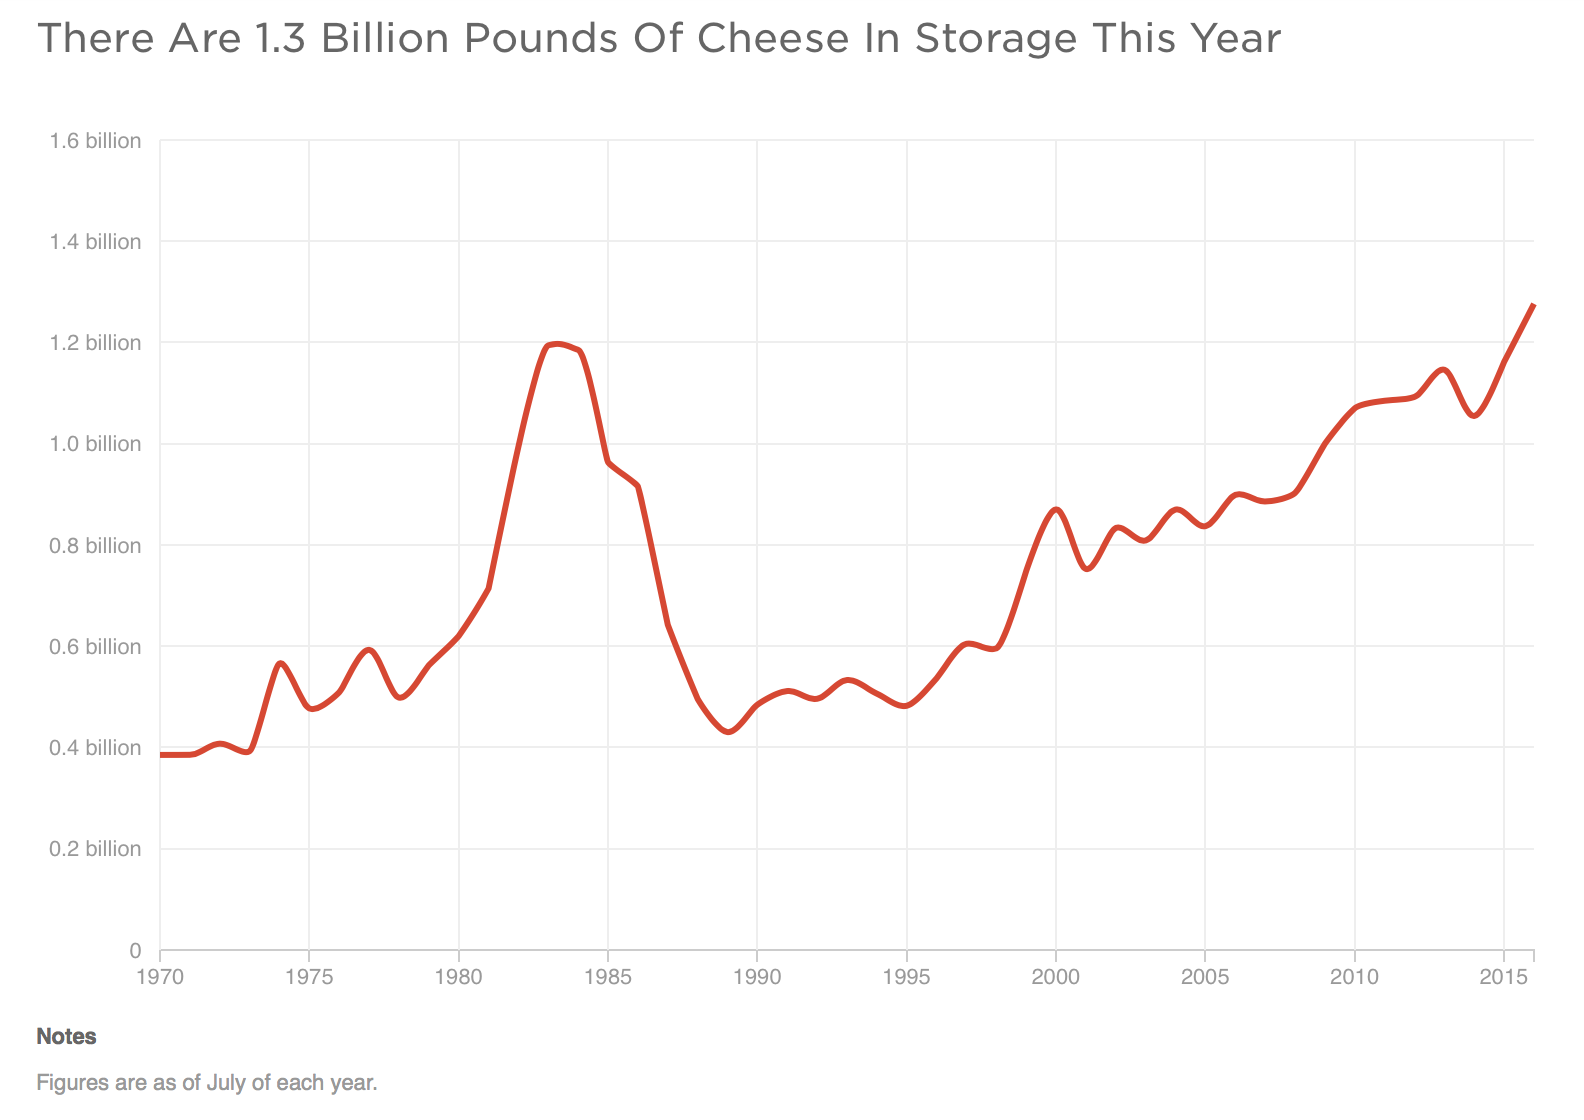 There Are 1.3 Billion Pounds Of Cheese In Storage This Year